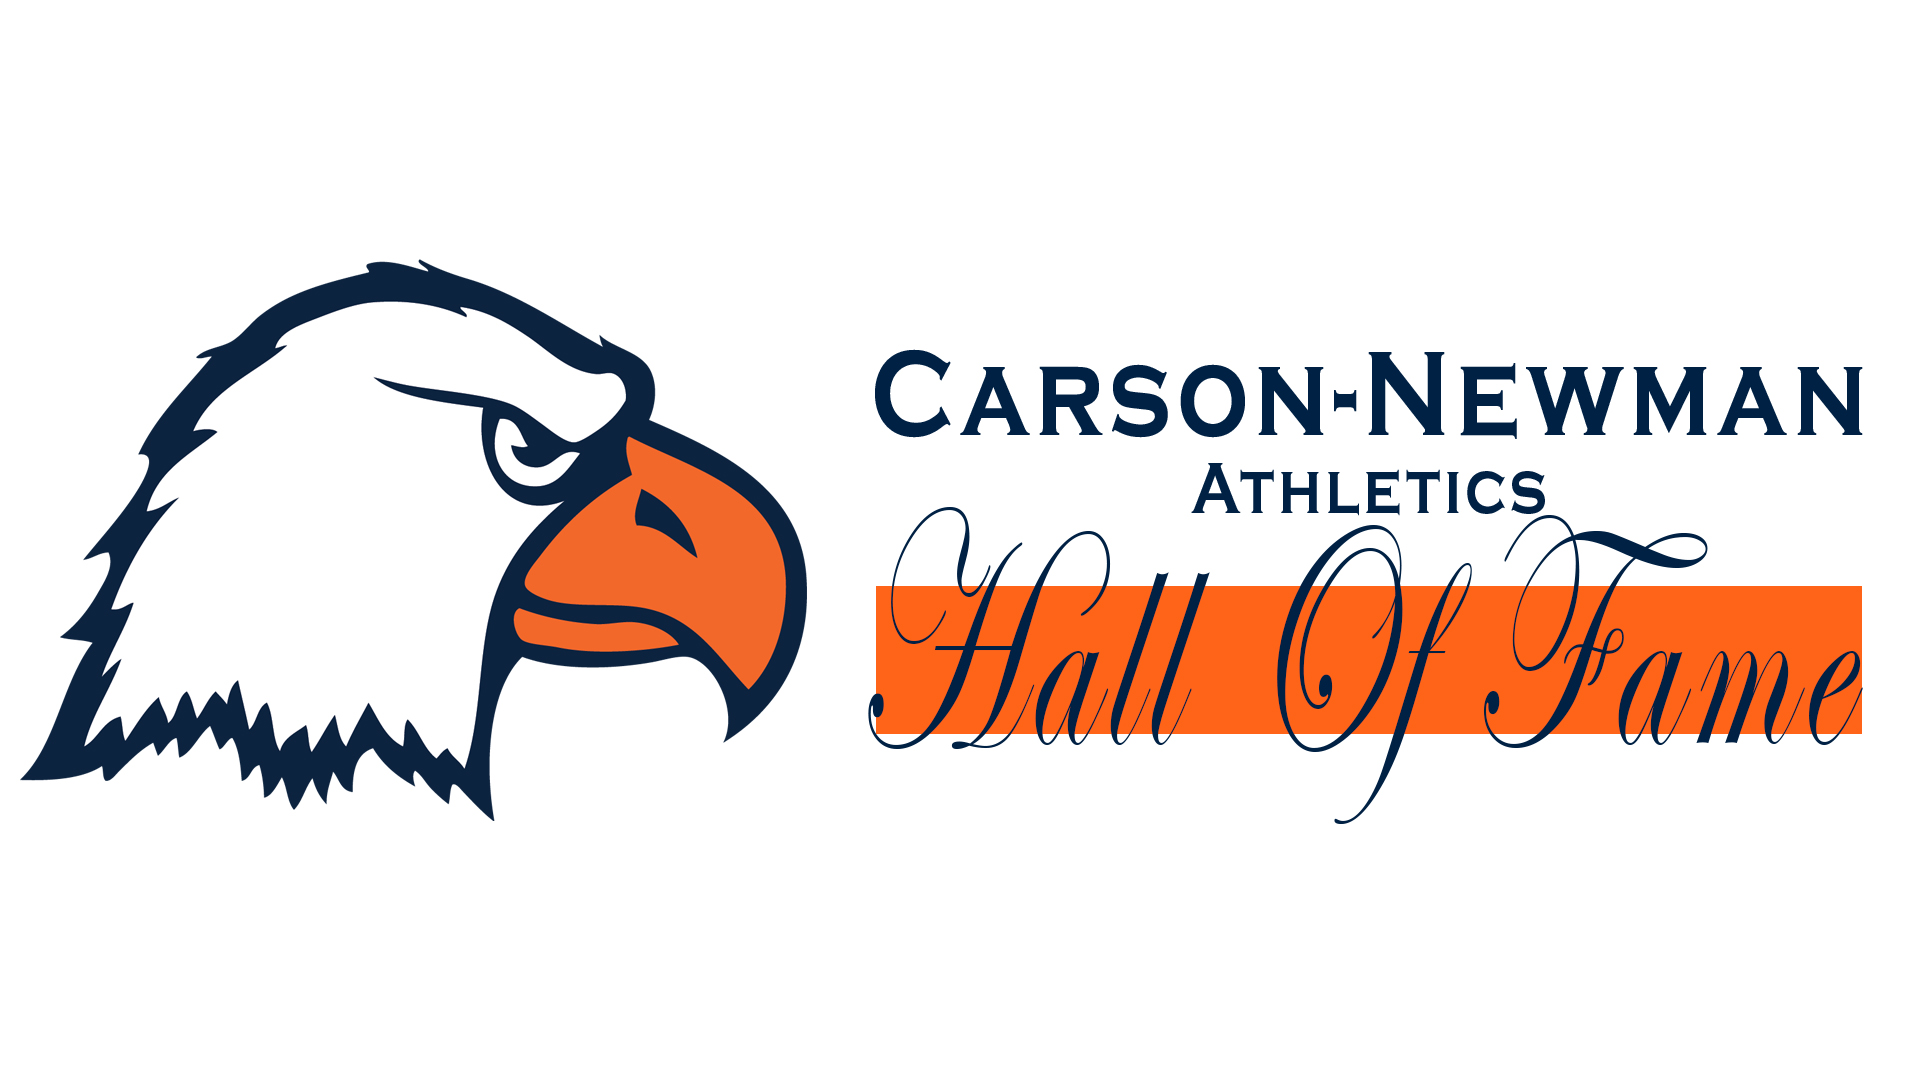 Seven slated for induction into Carson-Newman Athletics Hall of Fame